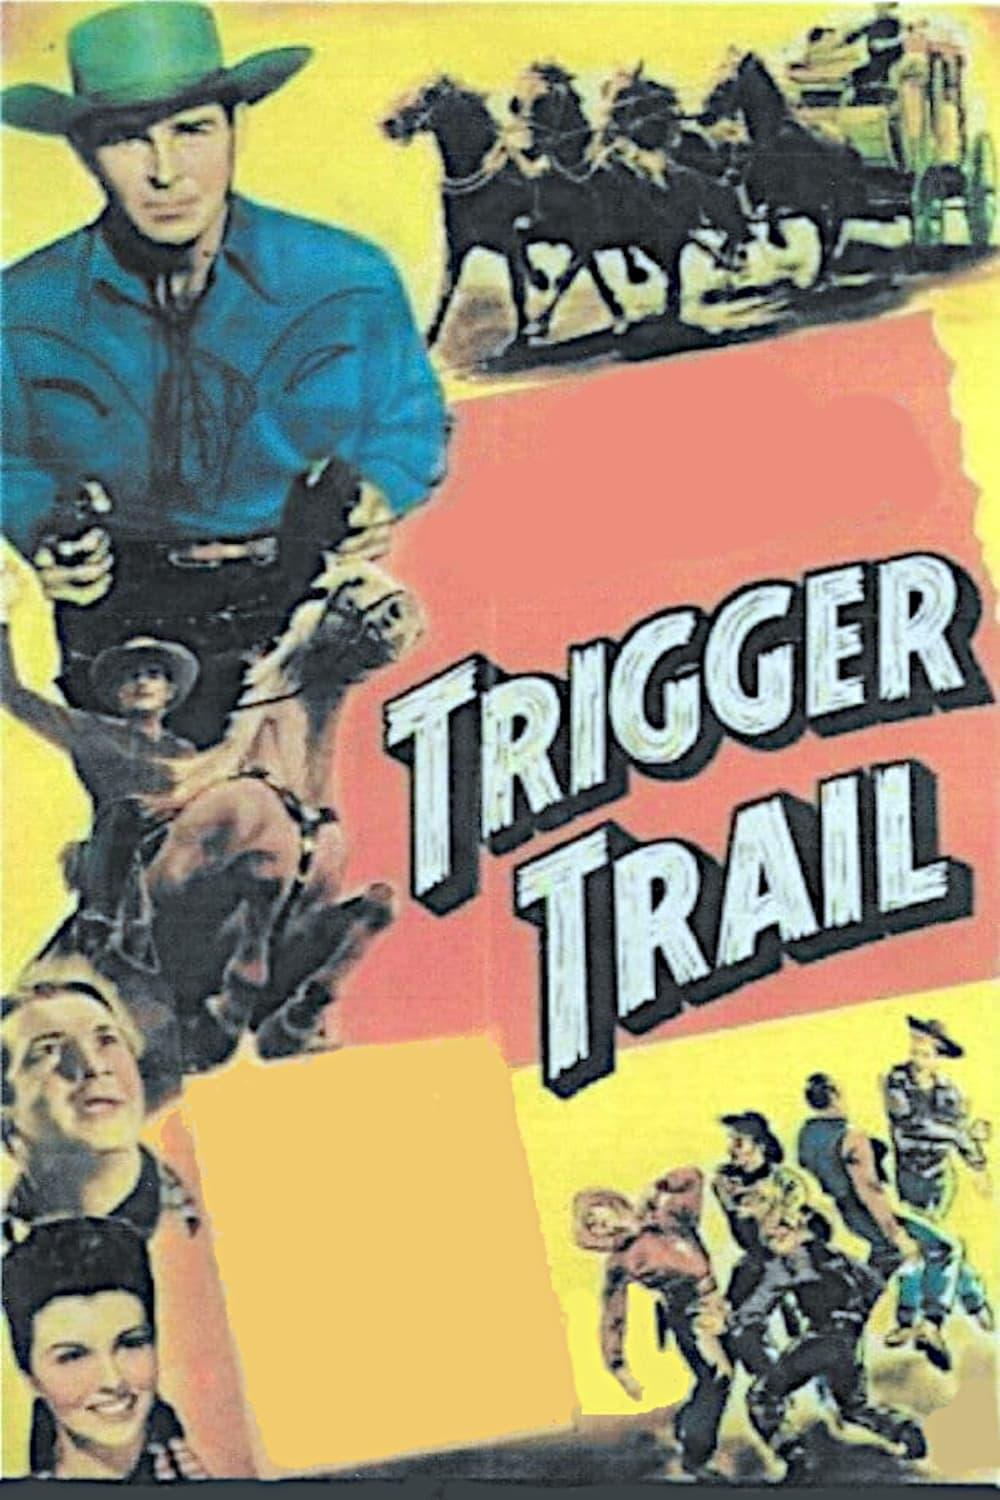 Trigger Trail poster